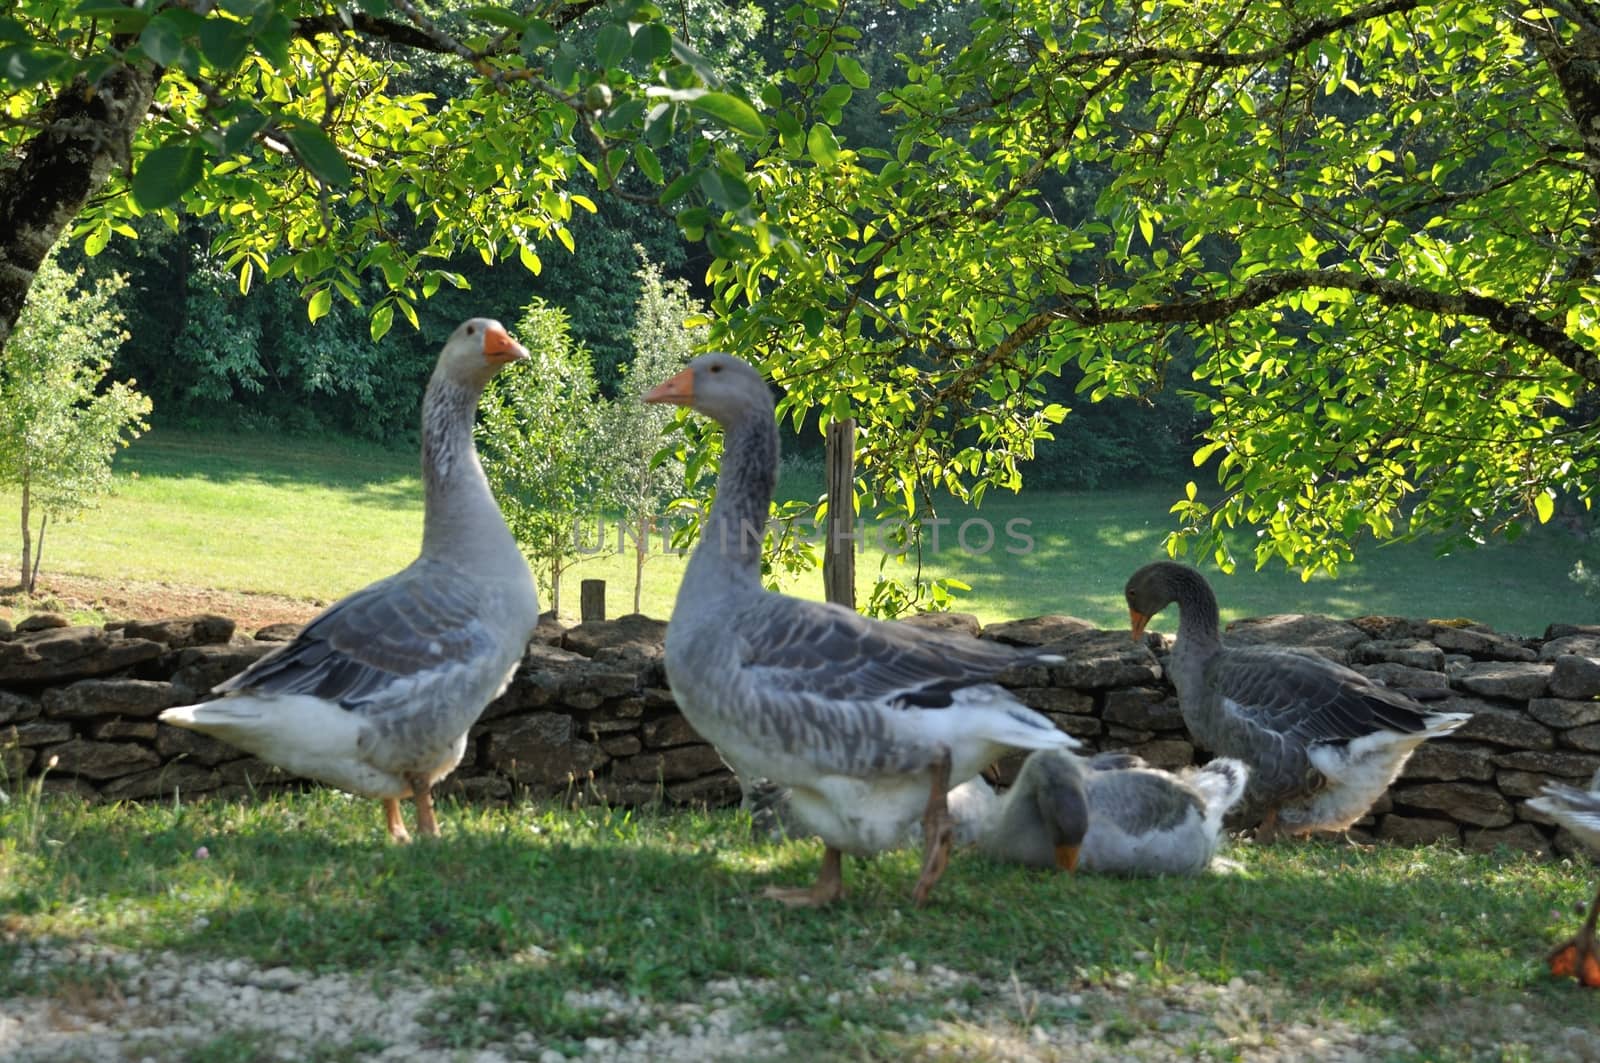 Farmed geese by BZH22